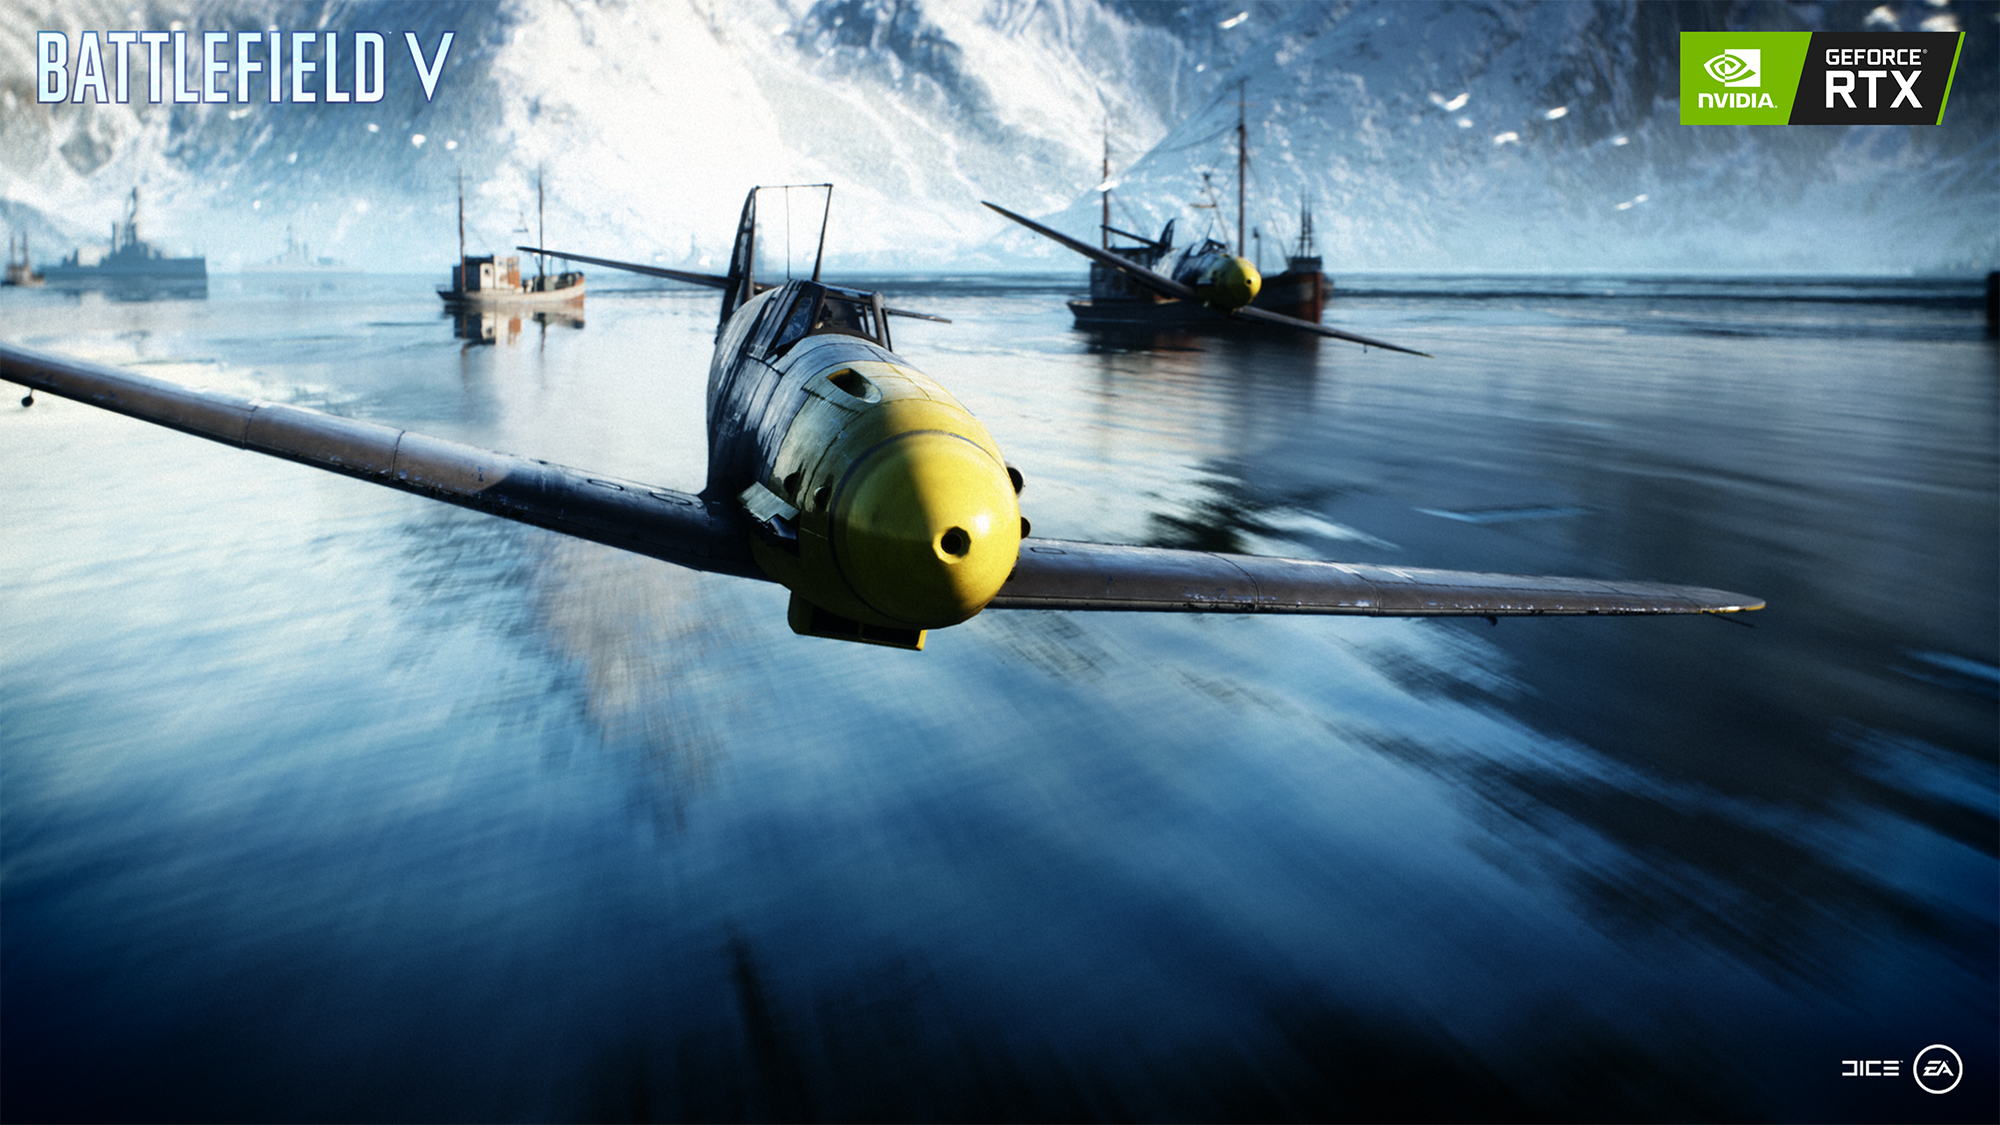 nvidia reveals geforce rtx 20 series graphics cards battlefield v ray tracing screenshot 004